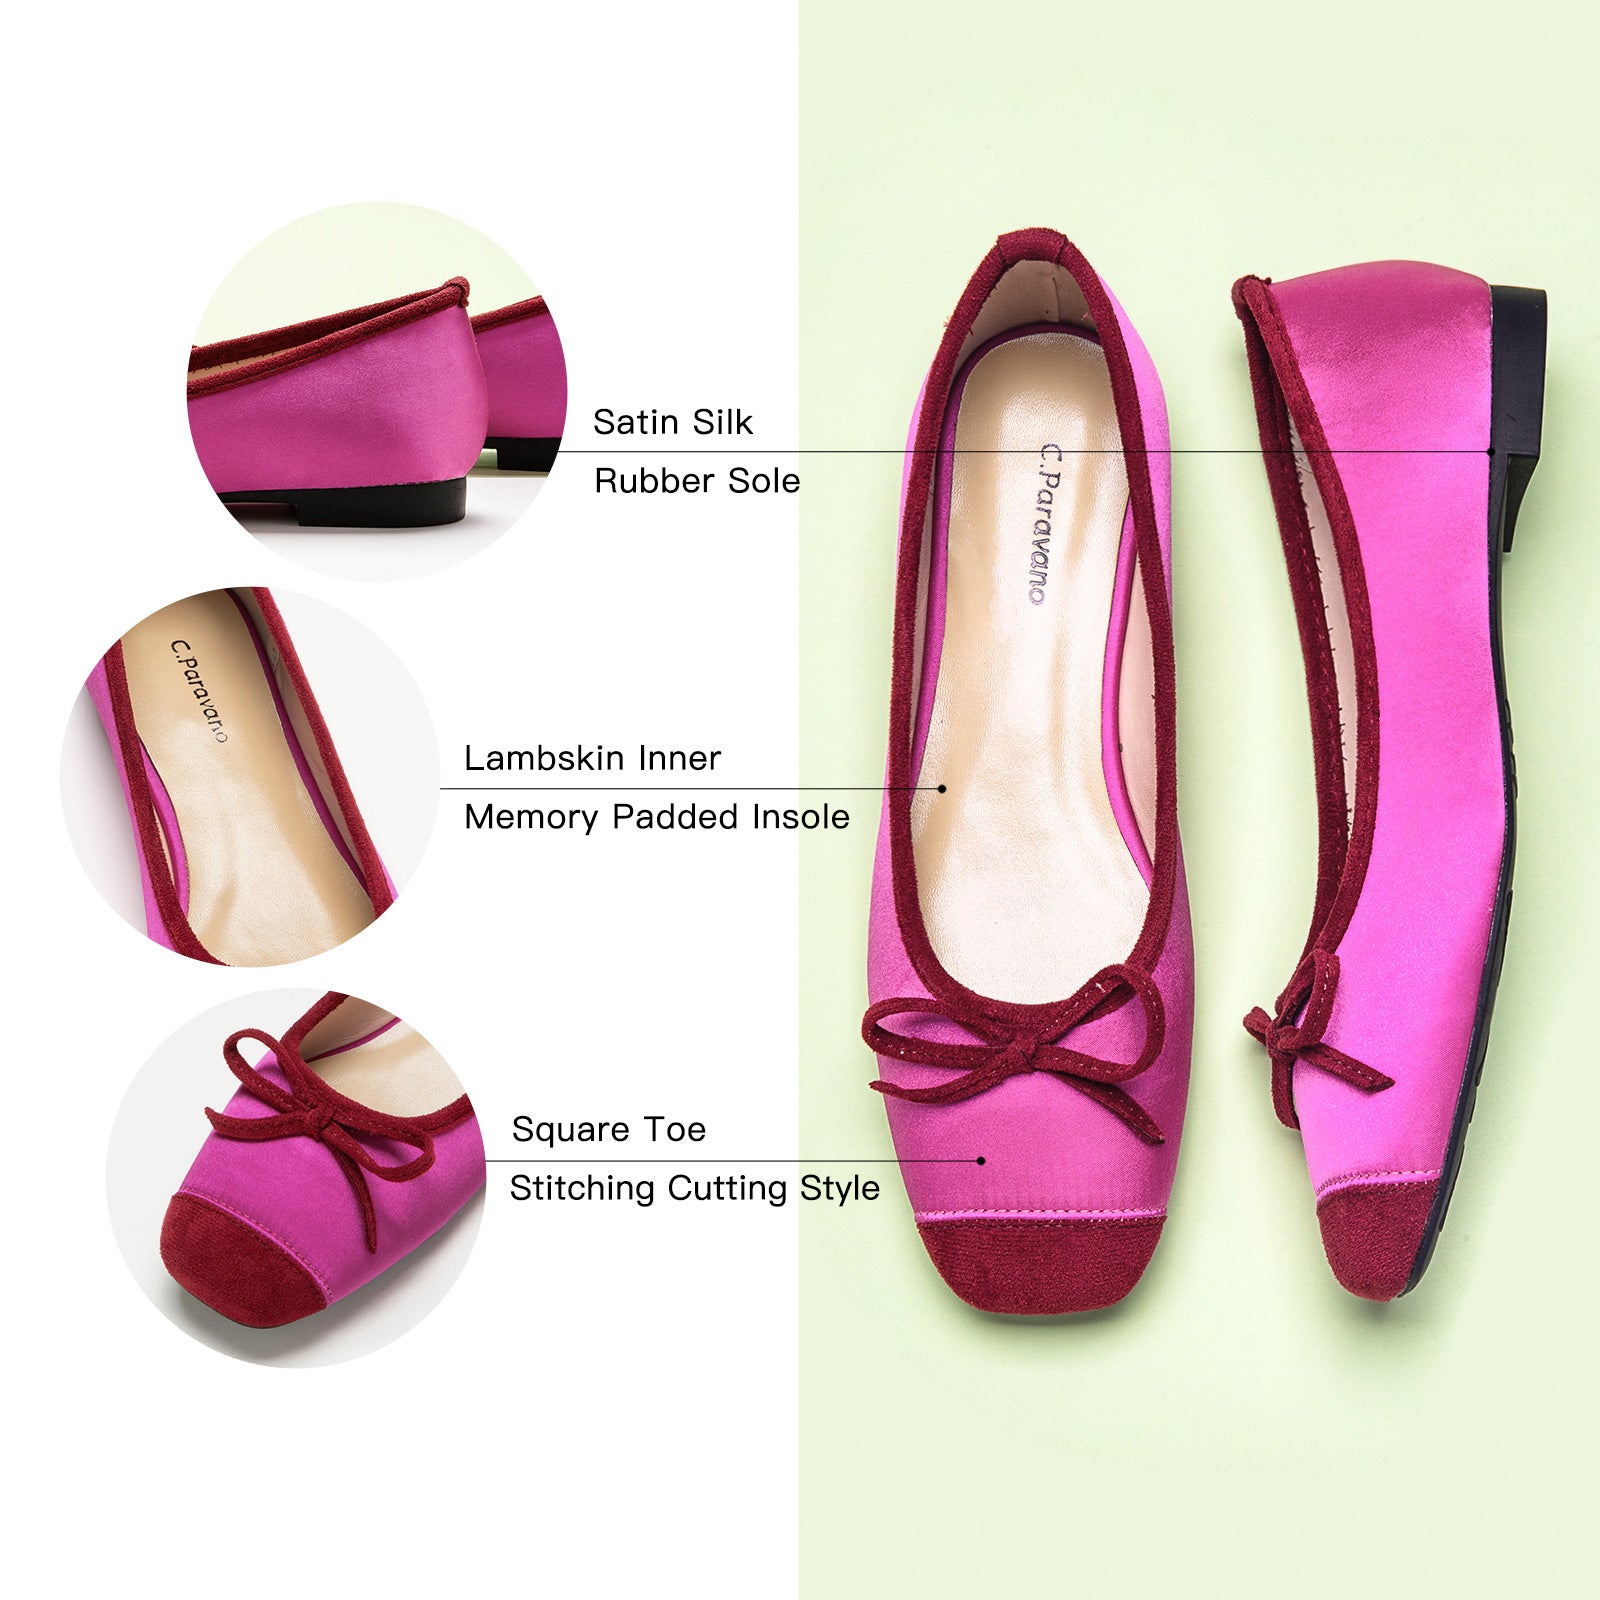 Hot Pink Silky Bowknot Ballet Flats, combining boldness with timeless elegance for a modern twist